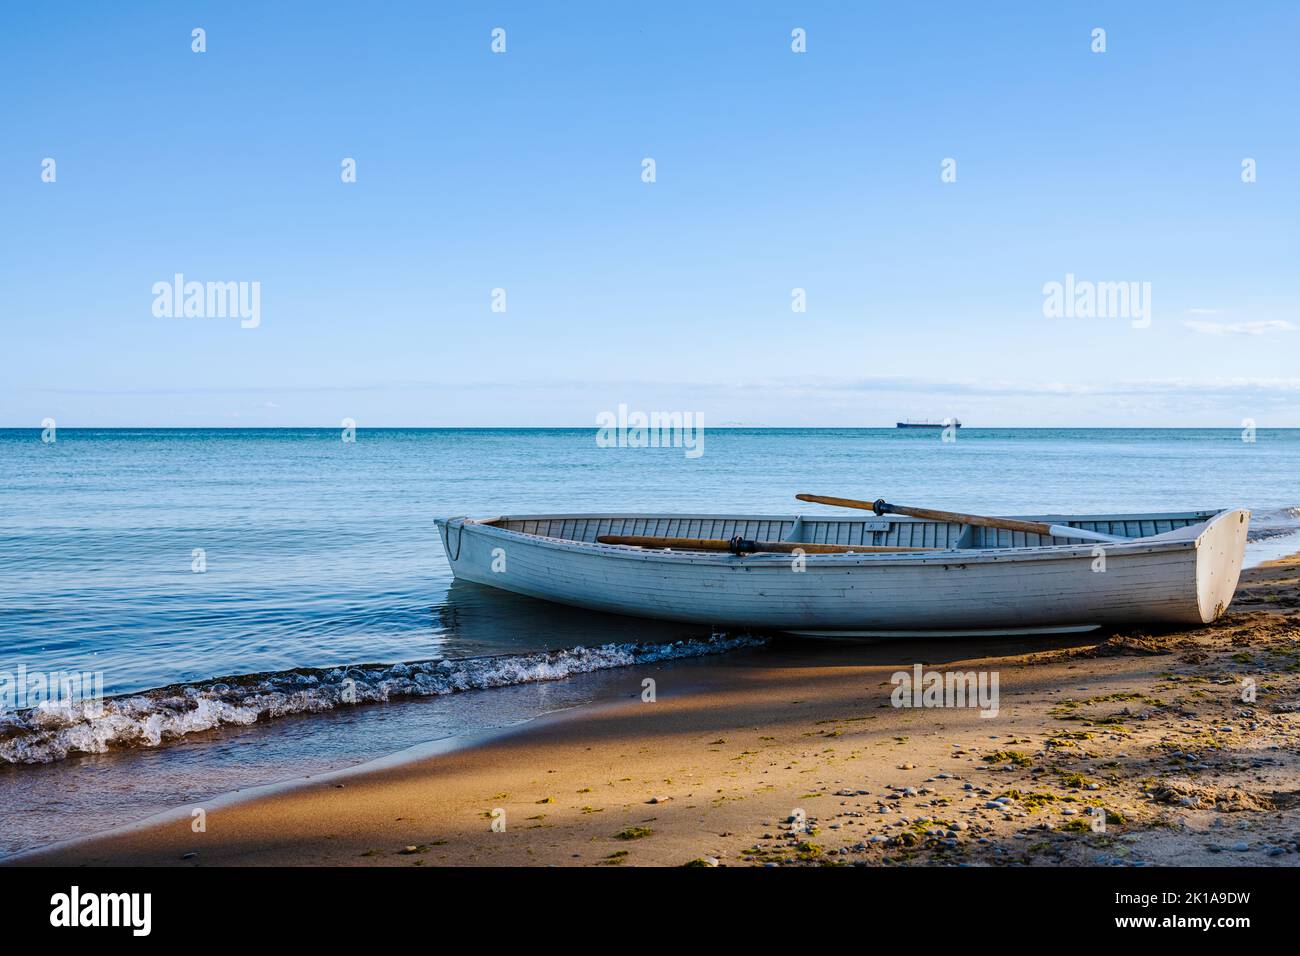 Old row boat on beach with shadow of trees. Calm ocean on the horizon. Stock Photo